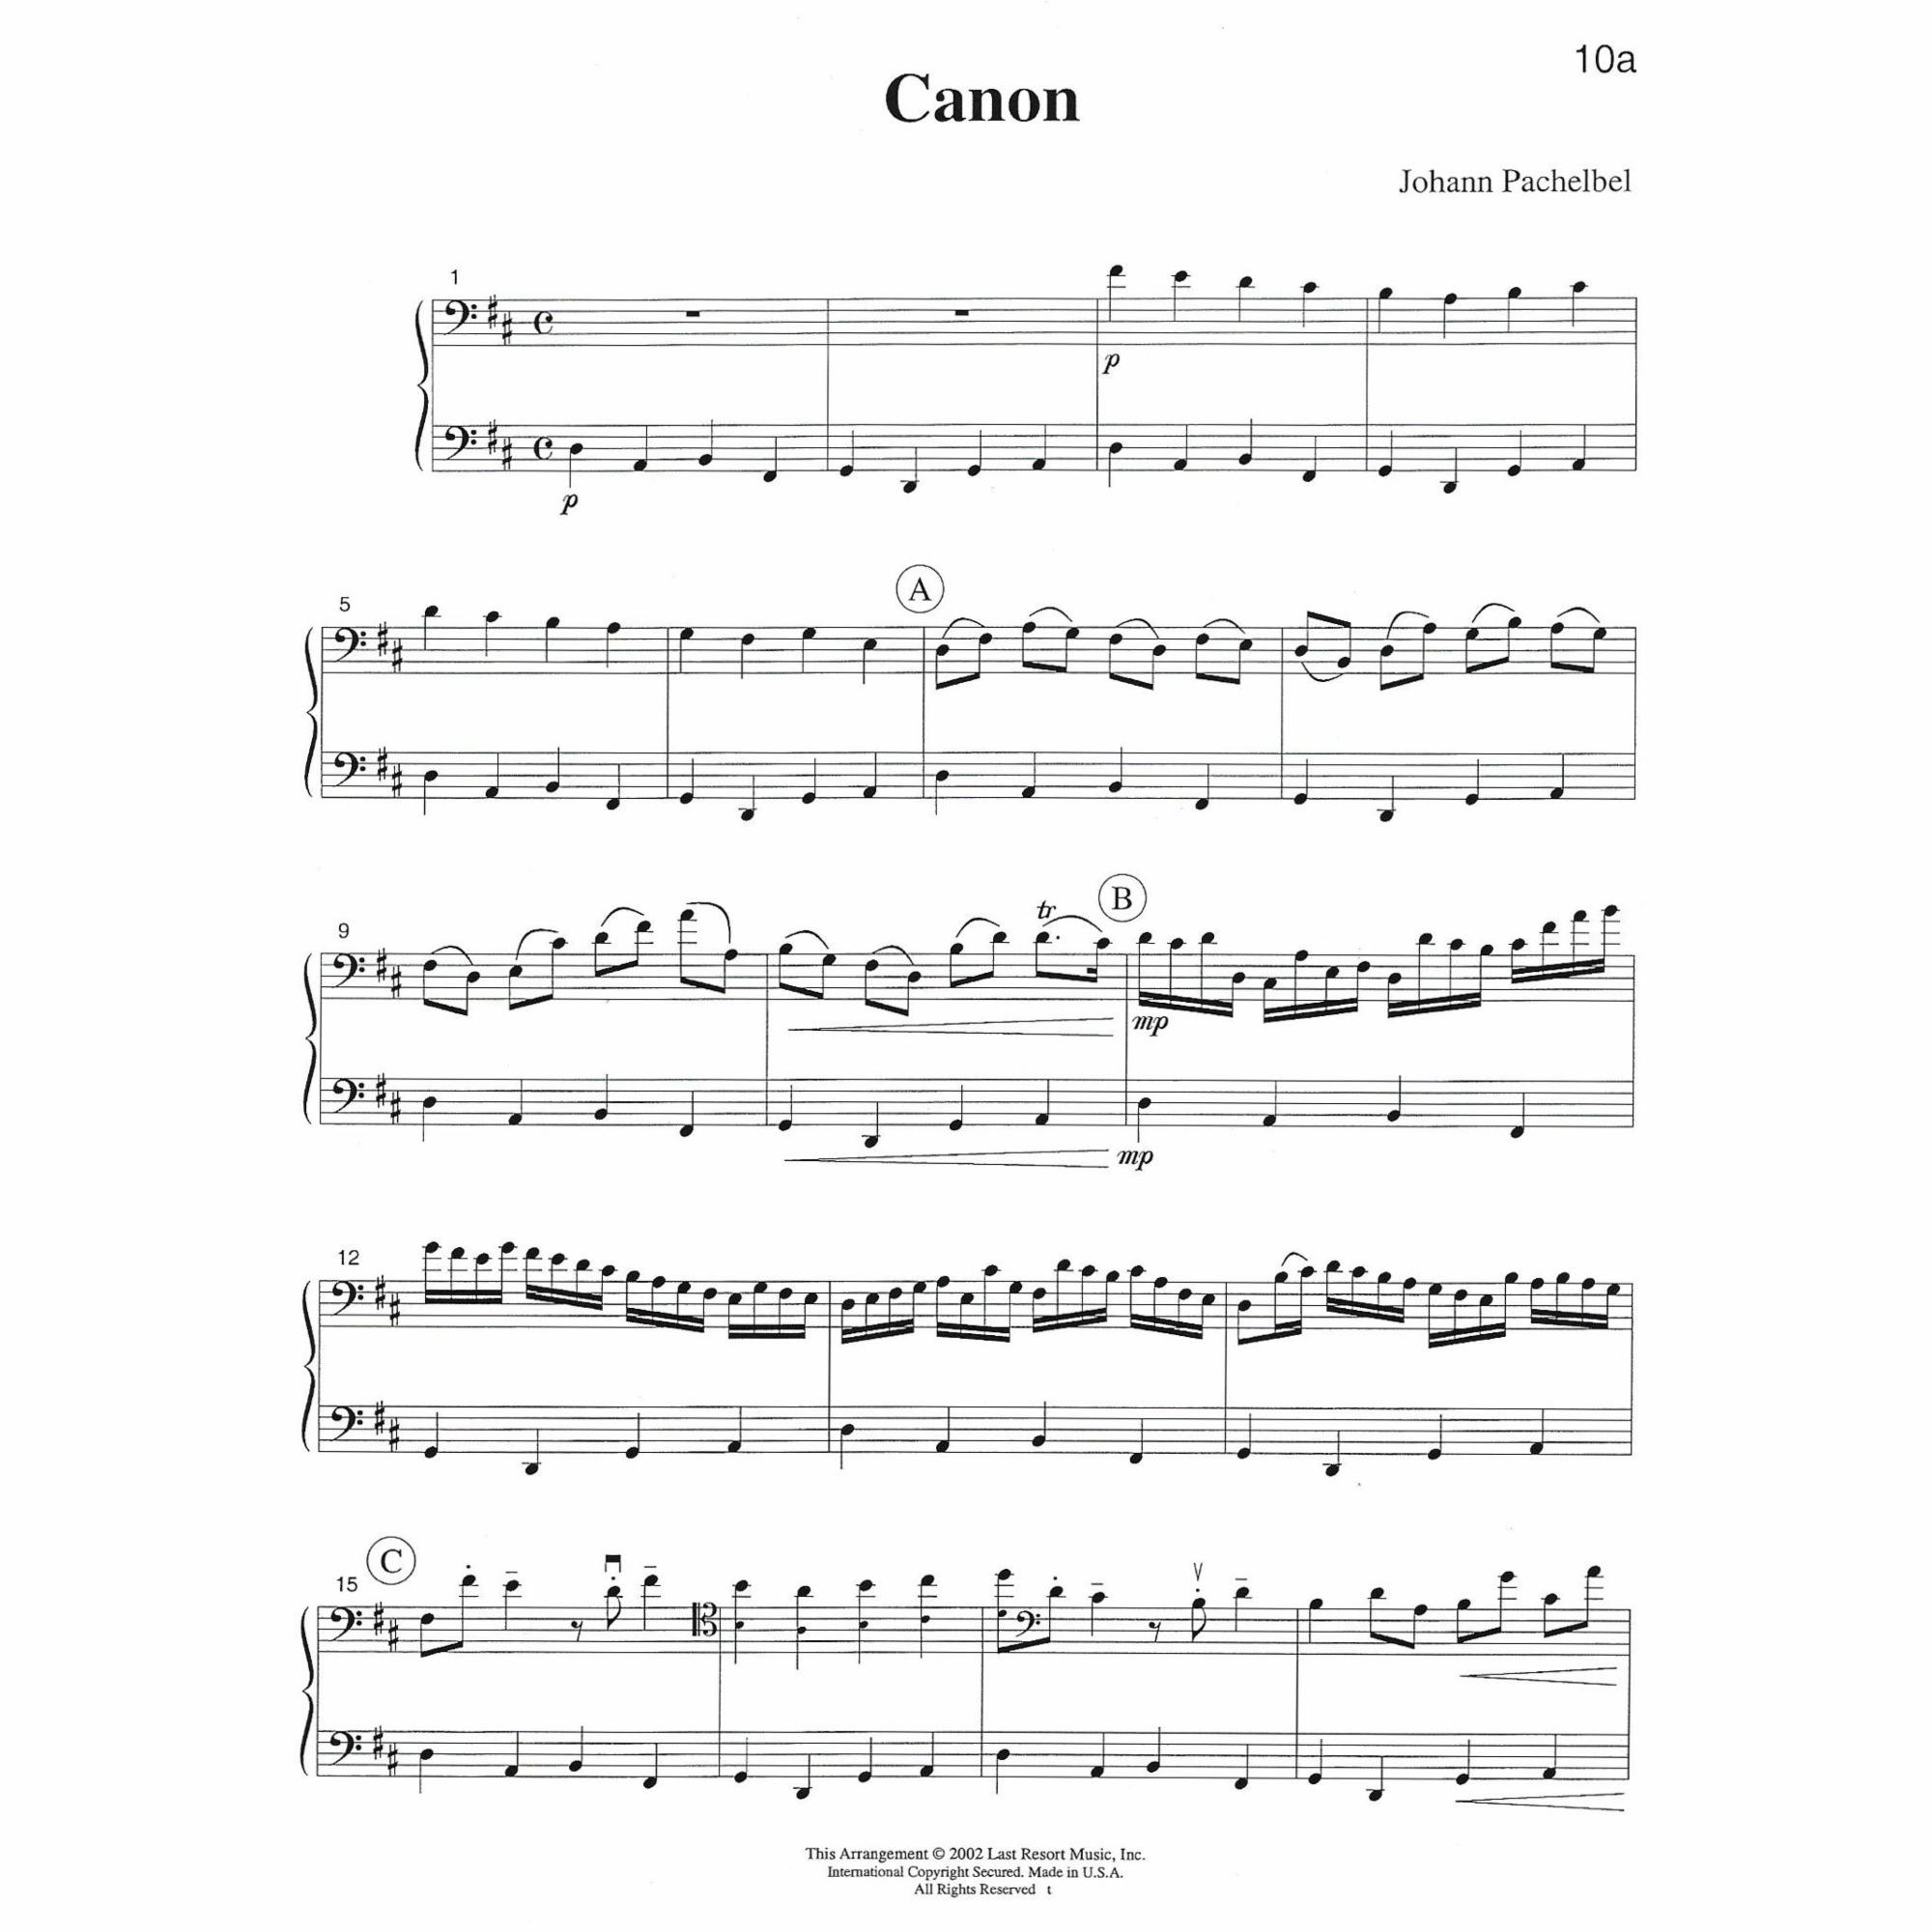 Sample: Two Cellos (Pg. 10a)